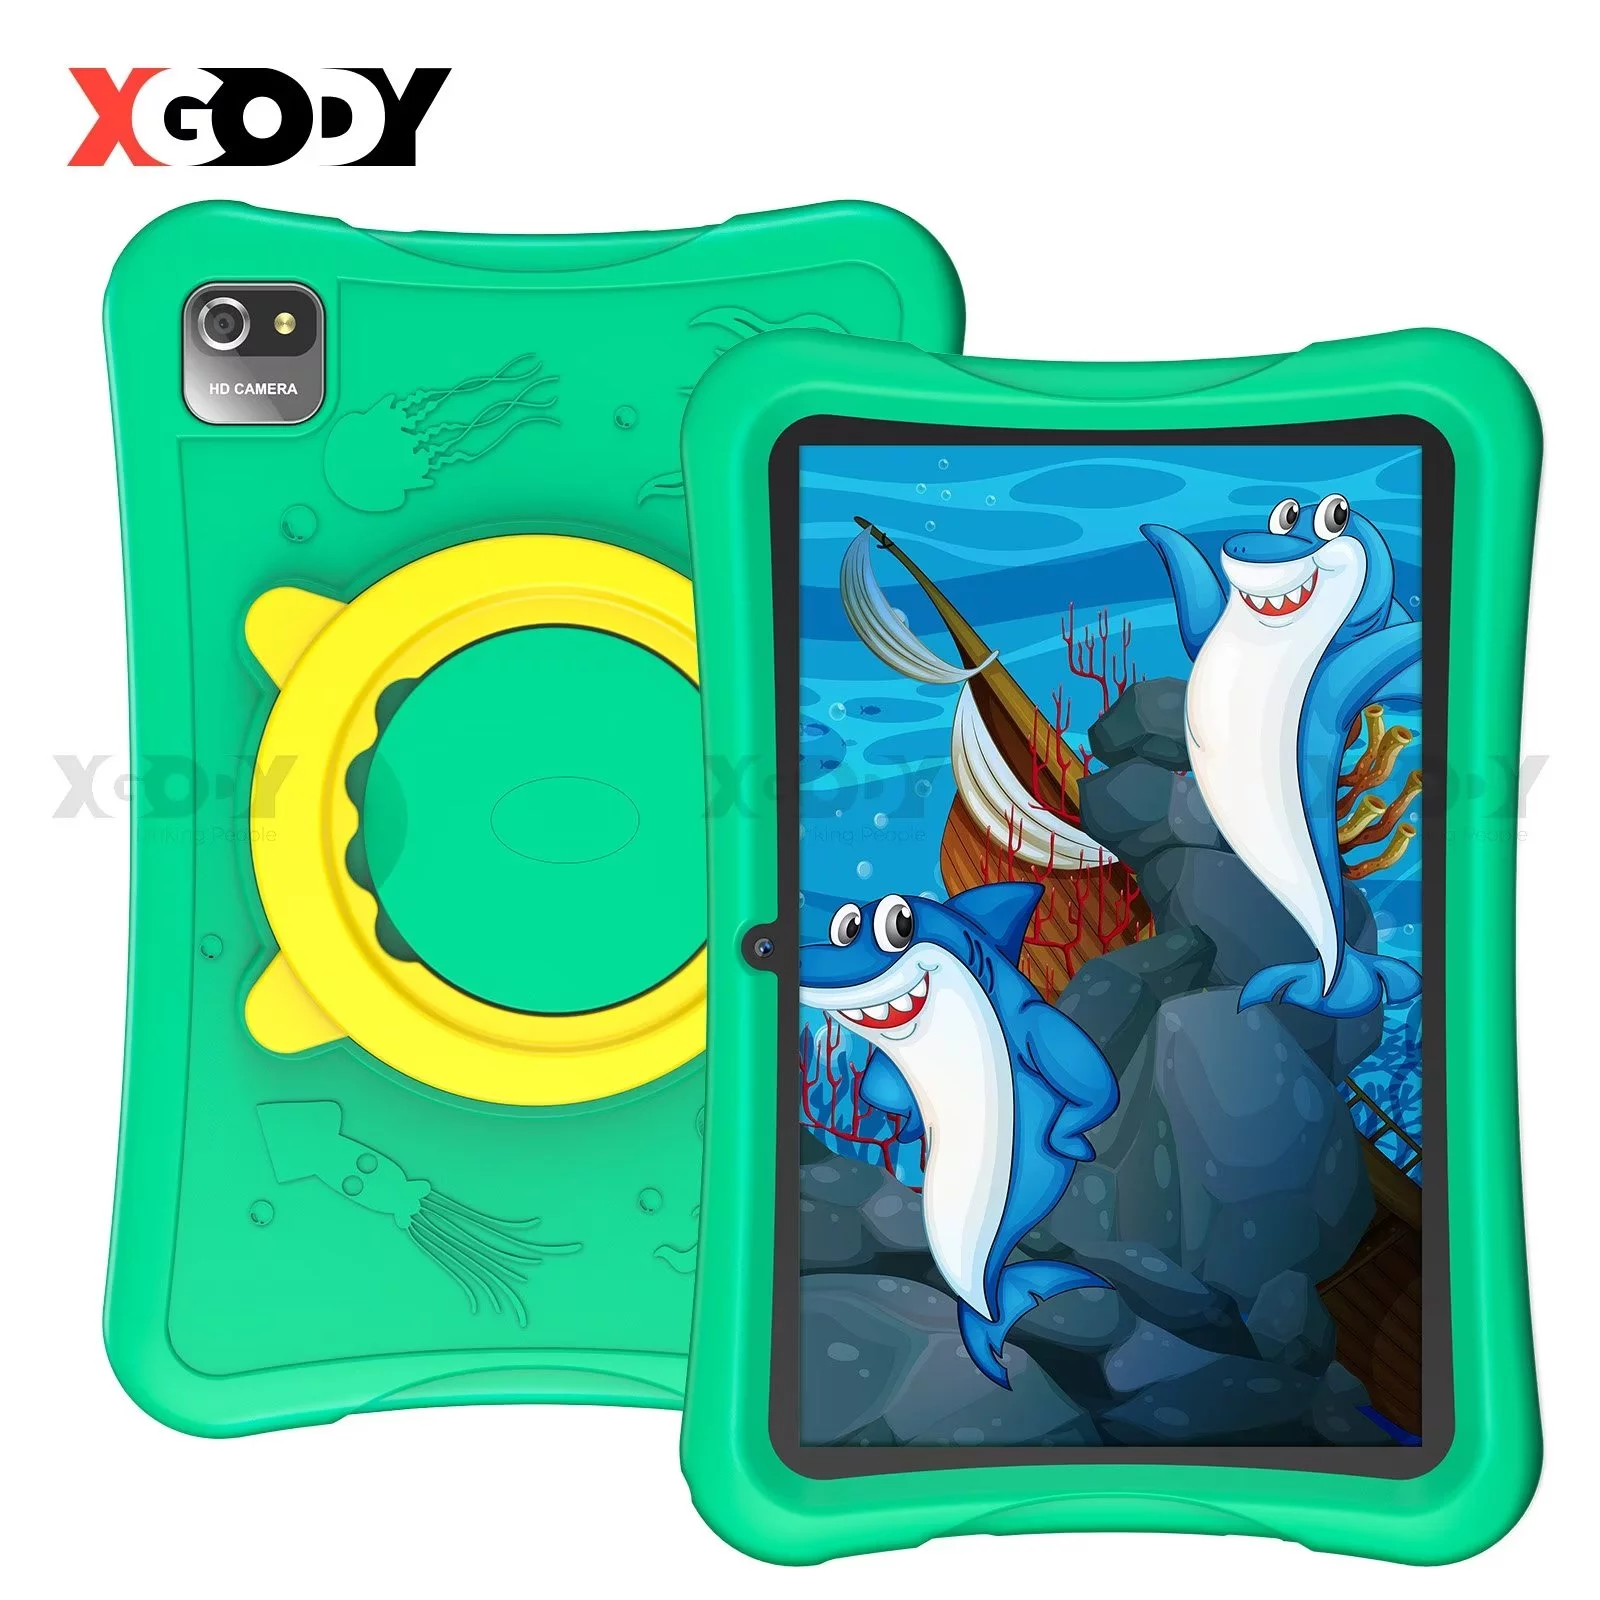 XGODY 10 inch Tablet,4GB+64GB Android Tablet for Kids&Adult,6000mA,over $130 value of pre-installed IWAWA Education APP,Green